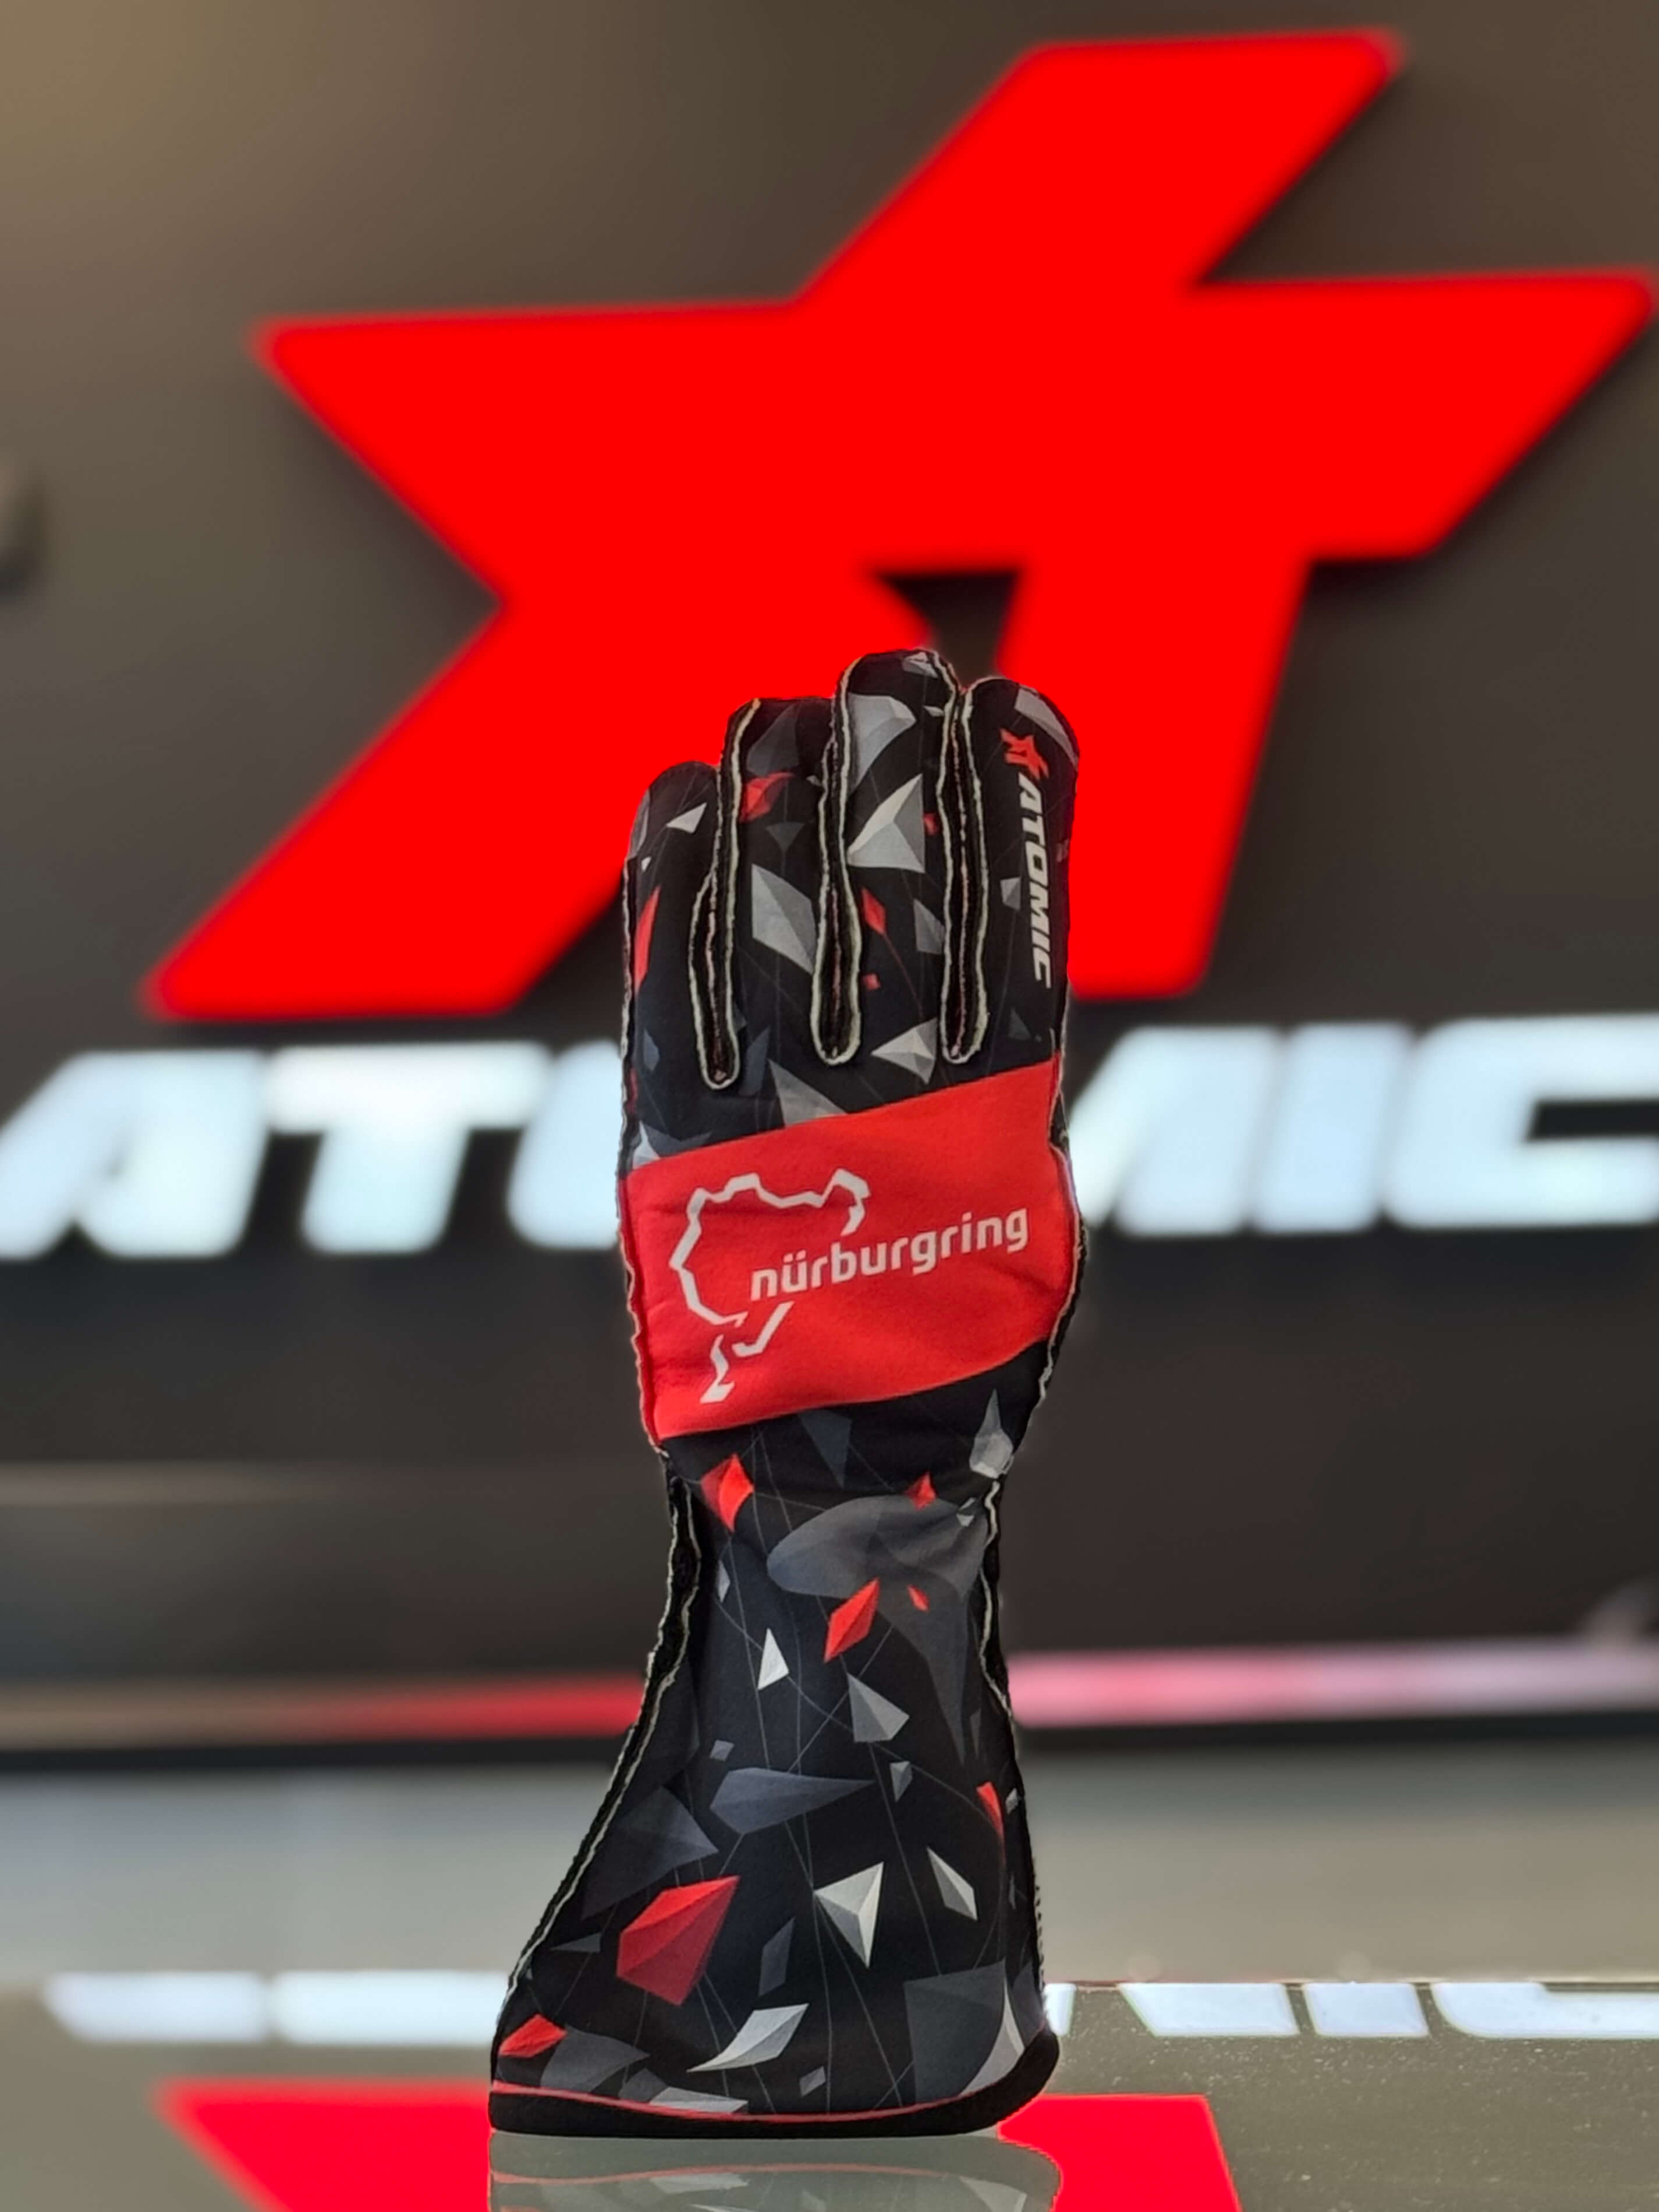 ARD R82-500-L Racing Gloves Atomic Nürburgring Edition FIA 8856-2018 Black/Red Size L (Officially Licensed Nürburgring Product) Photo-0 